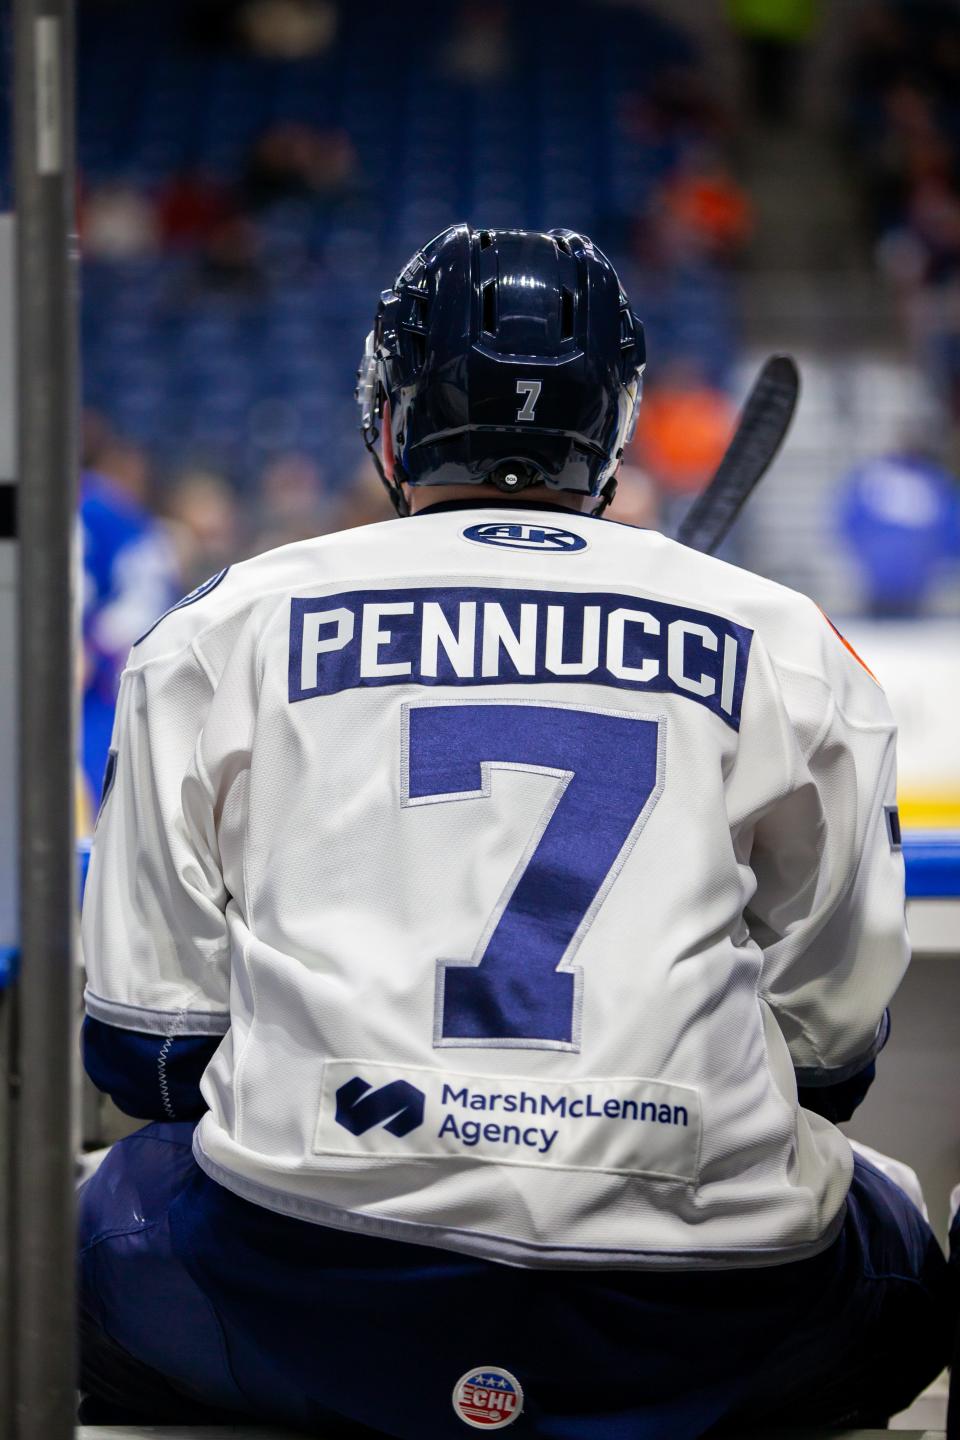 Worcester native Nick Pennucci made his professional hockey debut with the Worcester Railers on Jan. 5, in a game against the Trois-Rivières Lions at the DCU Center.